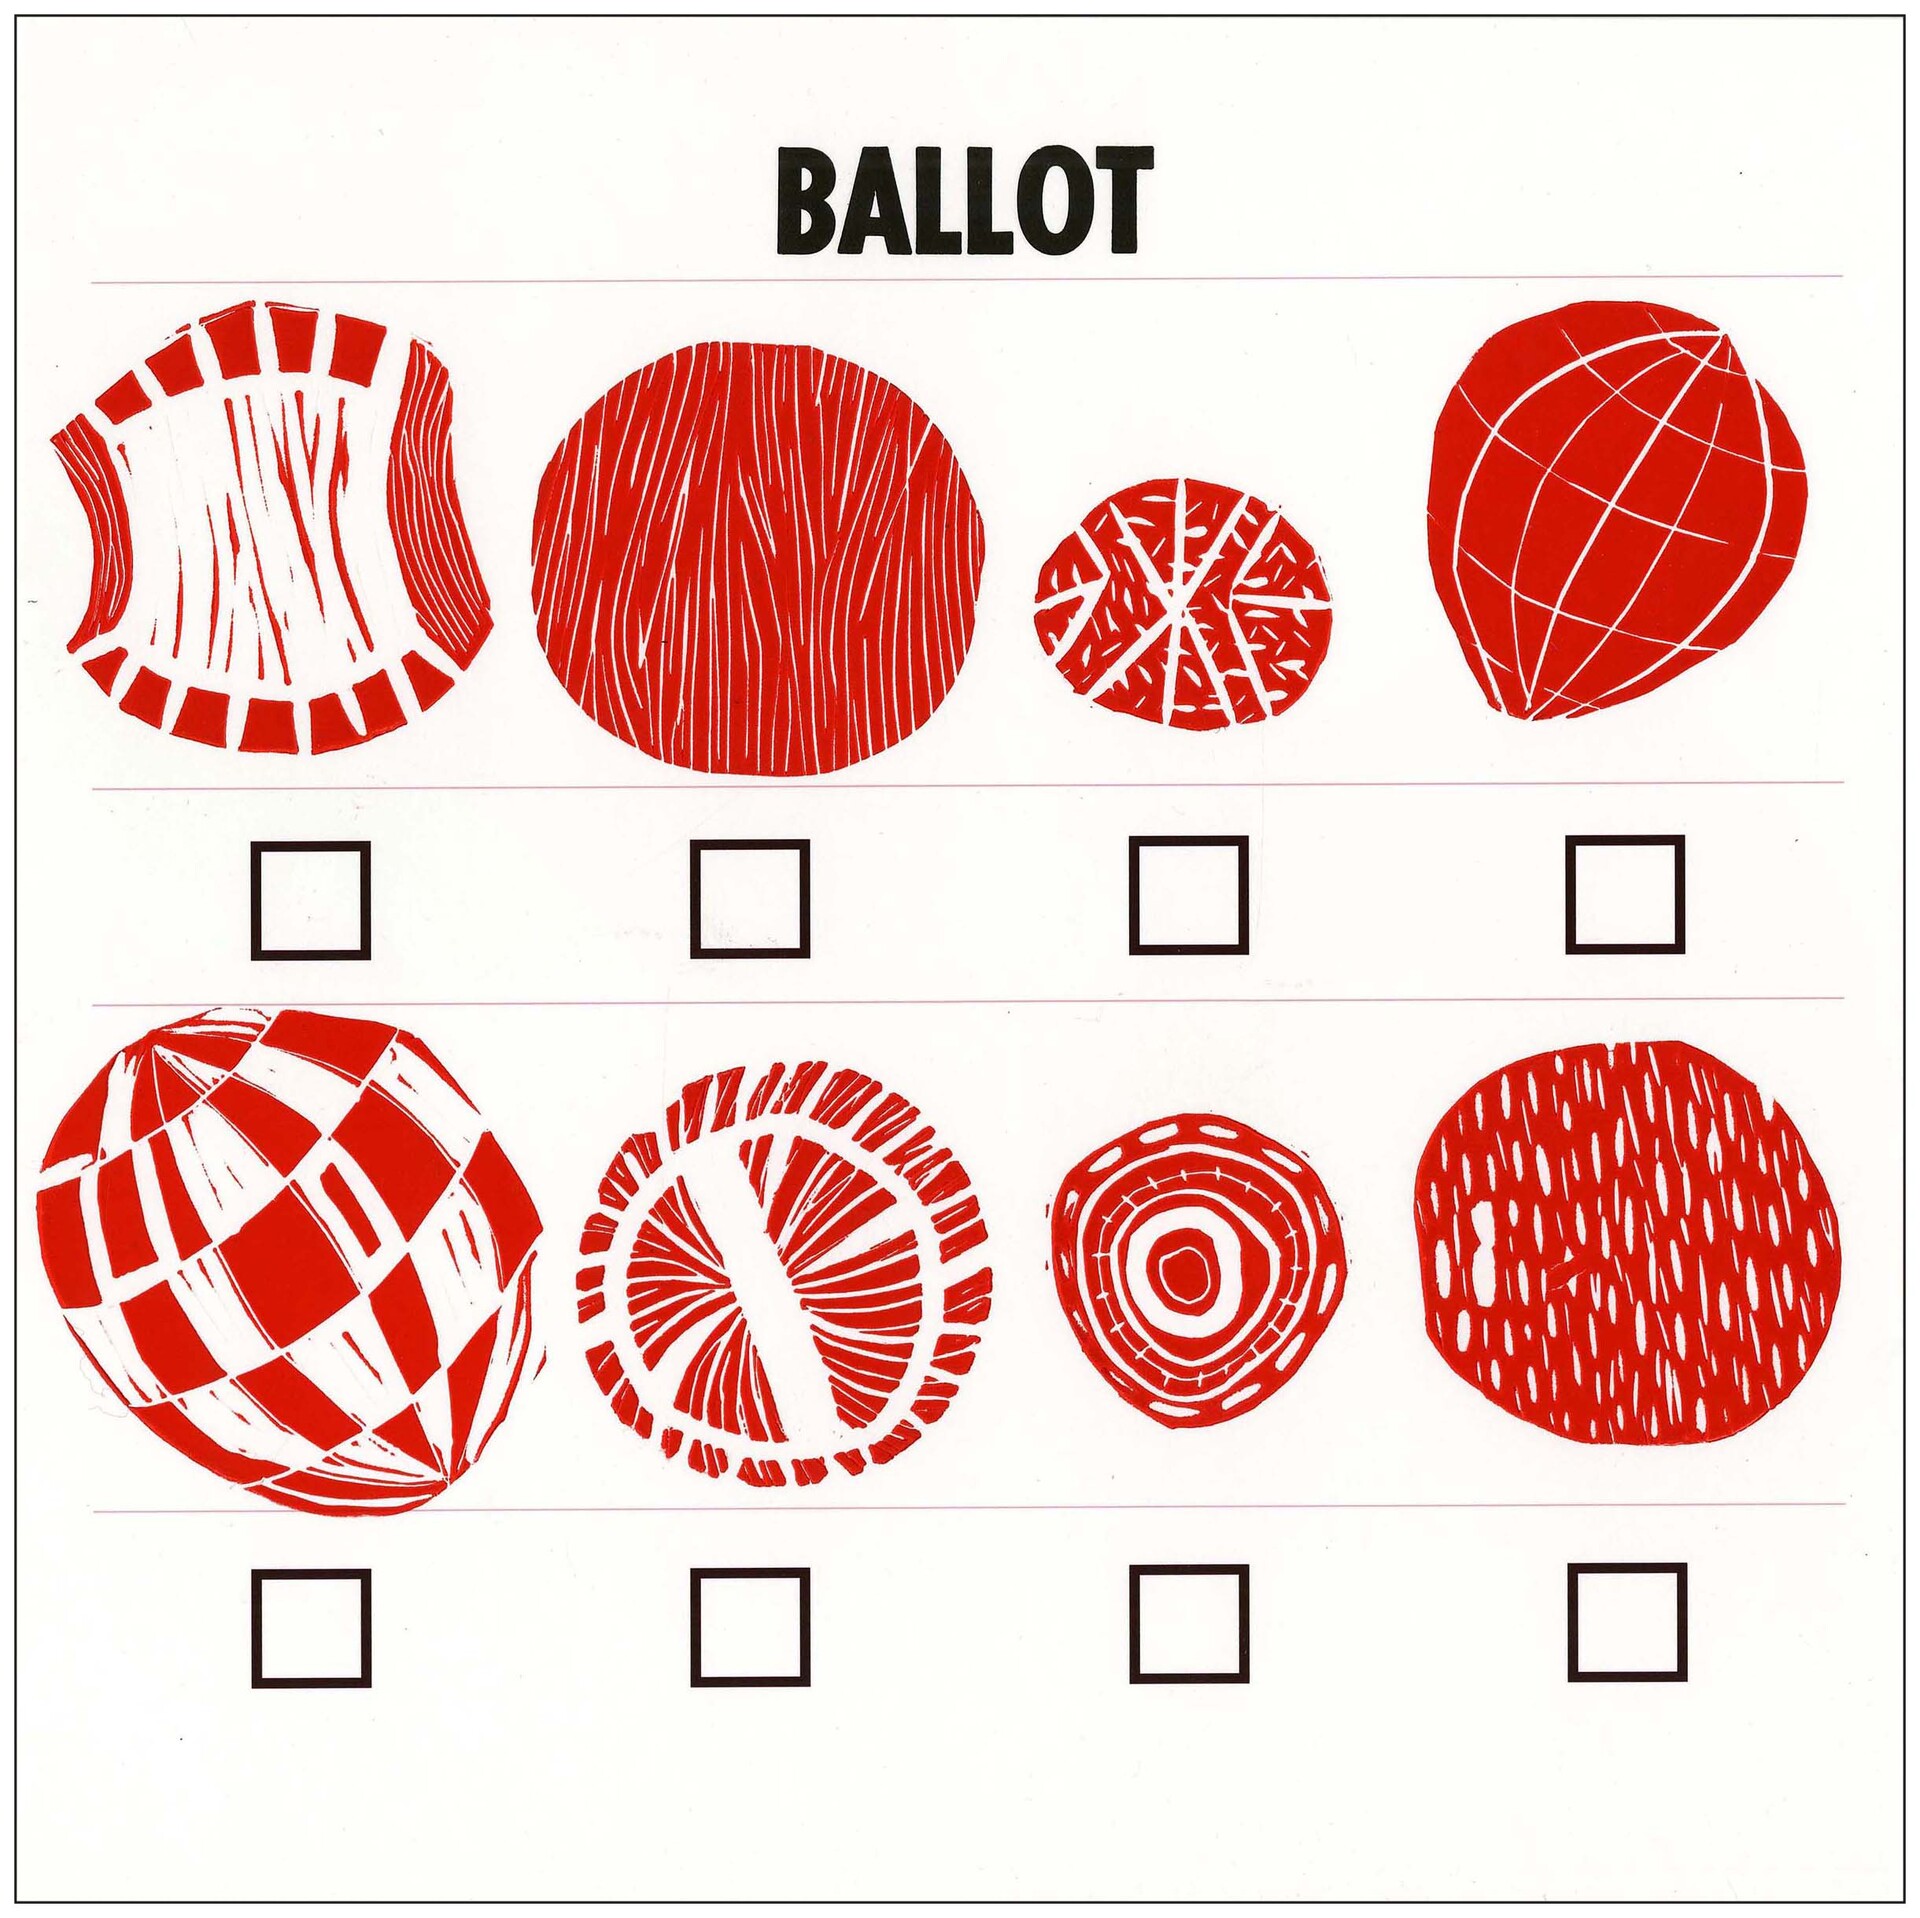 Diane Fine Linocut digital print of checkboxes on a ballot with abstract figures where the candidates name would appear